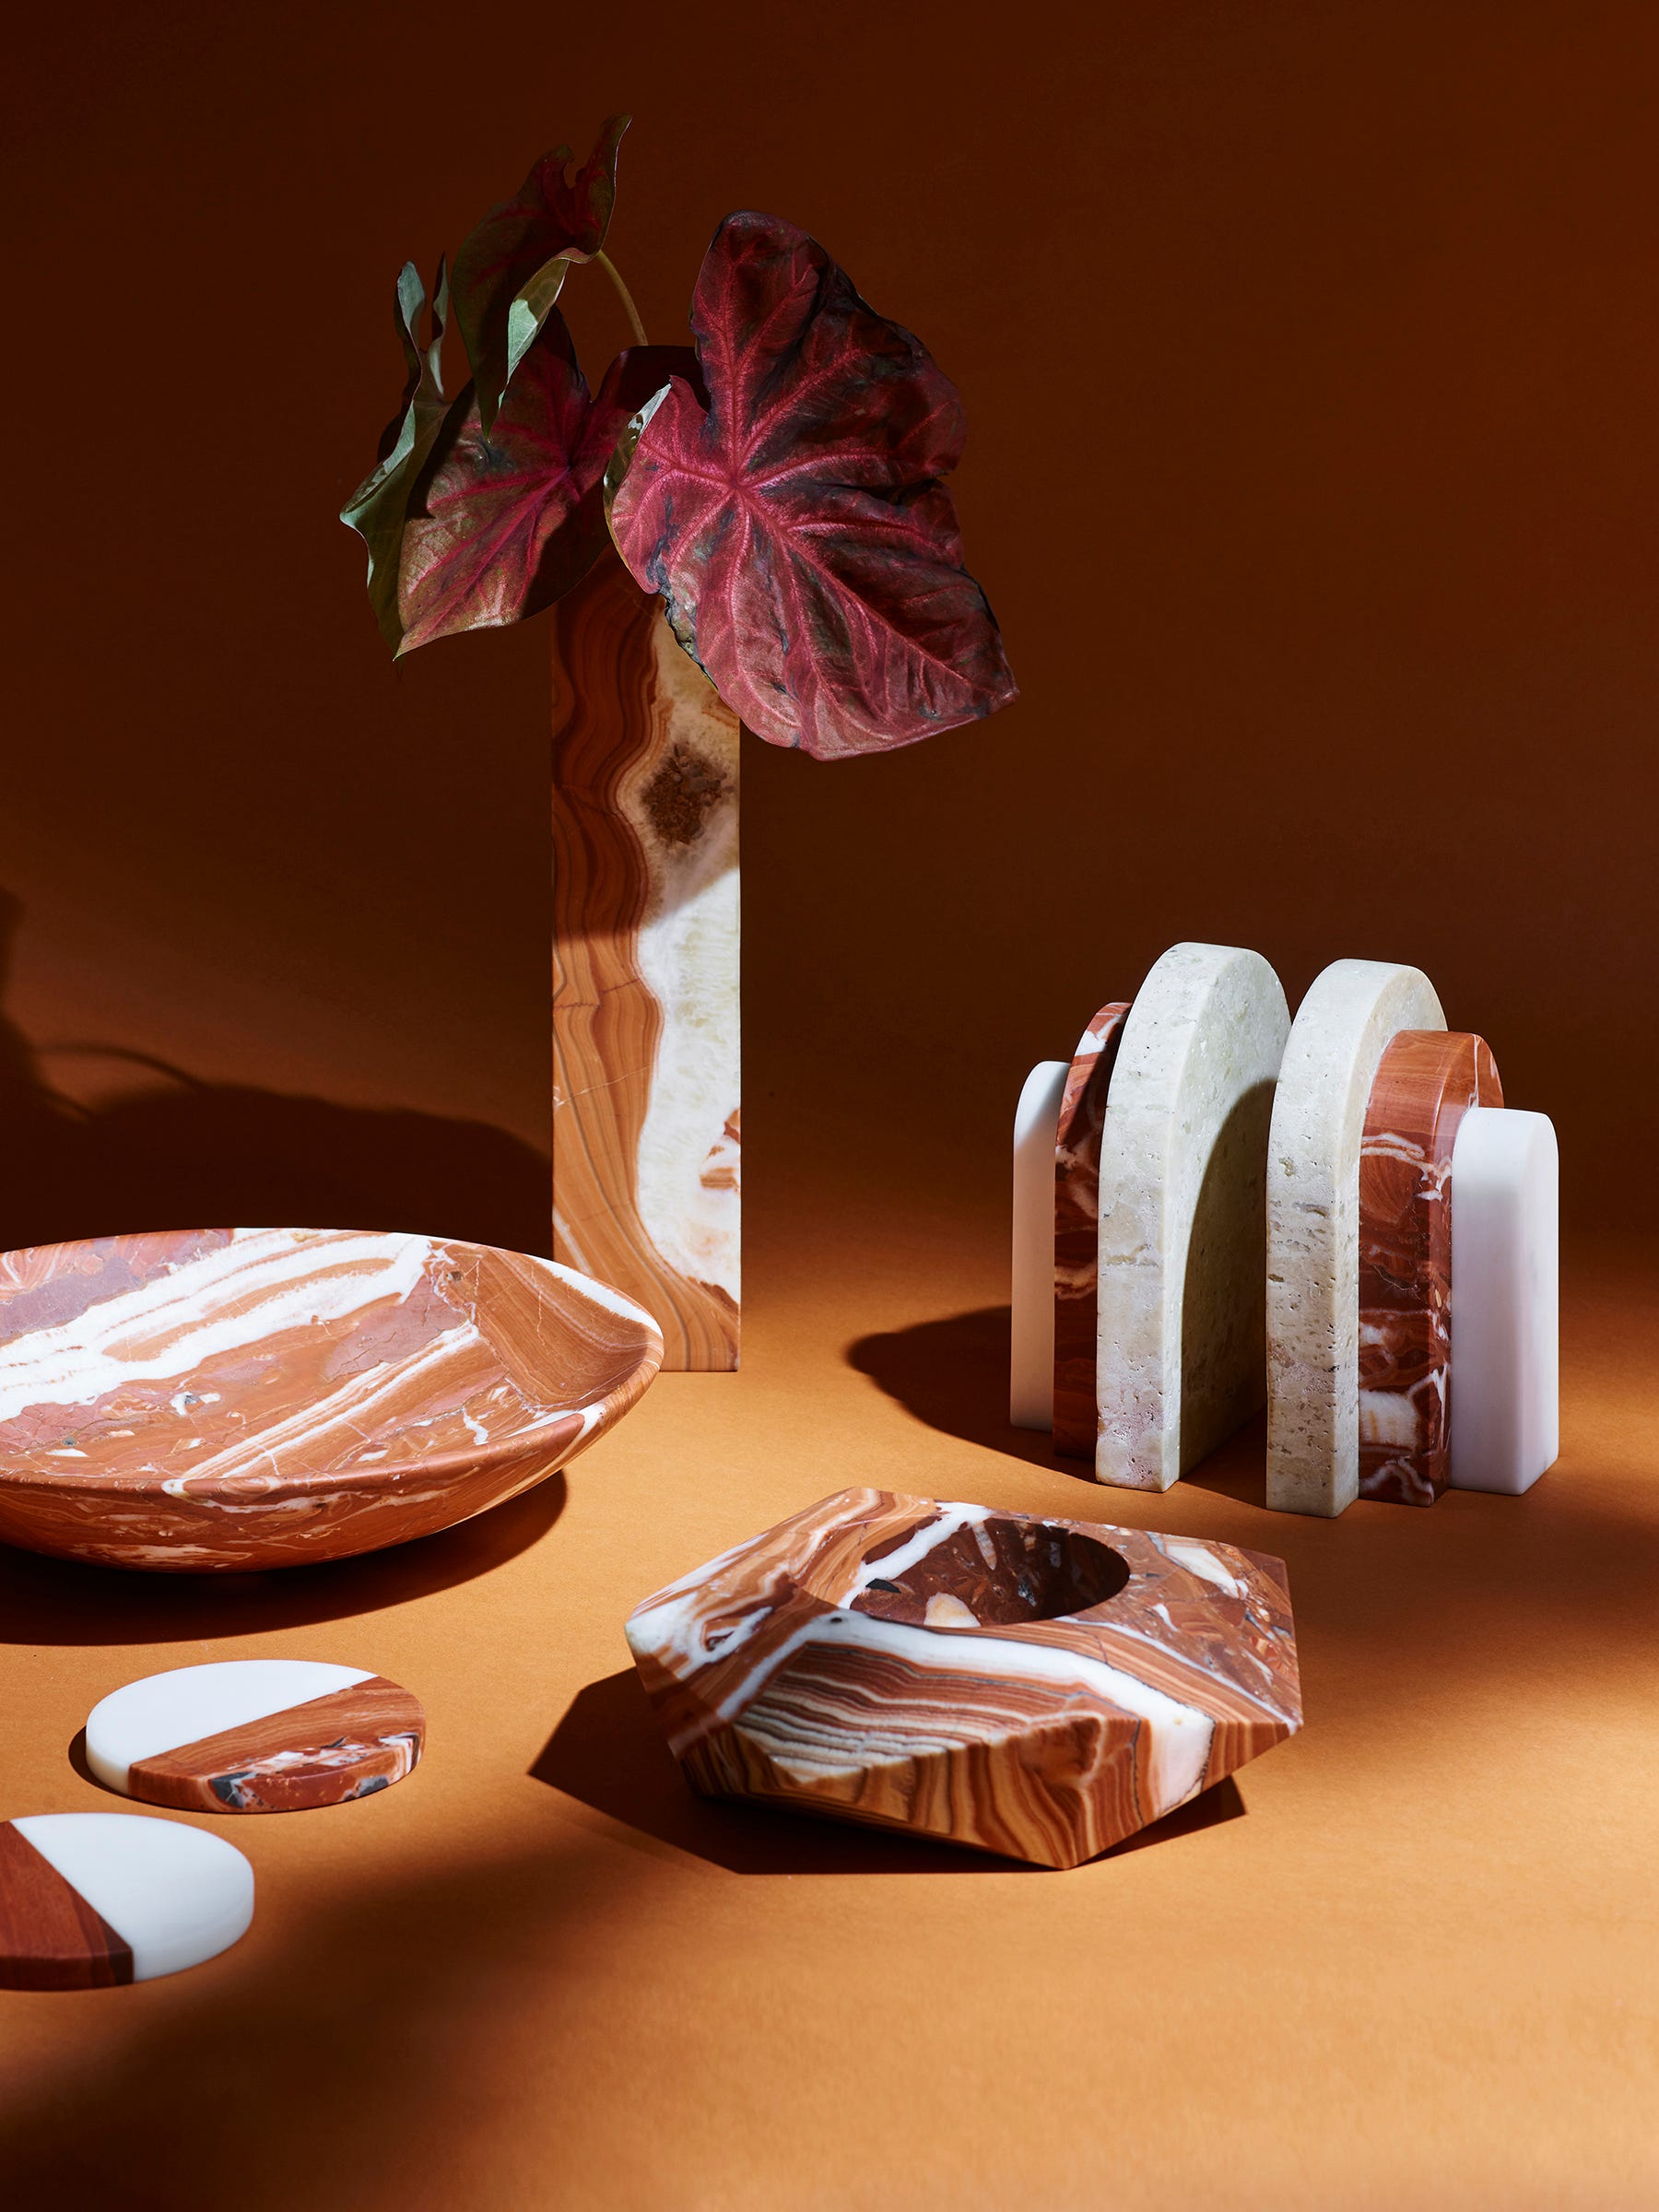 Many of the pieces in this range of Rosso marble accessories was inspired by the modernist architecture of Oscar Niemeyer. The stones were chosen for their color and graining, but as it's a natural product, patterns may vary slightly.